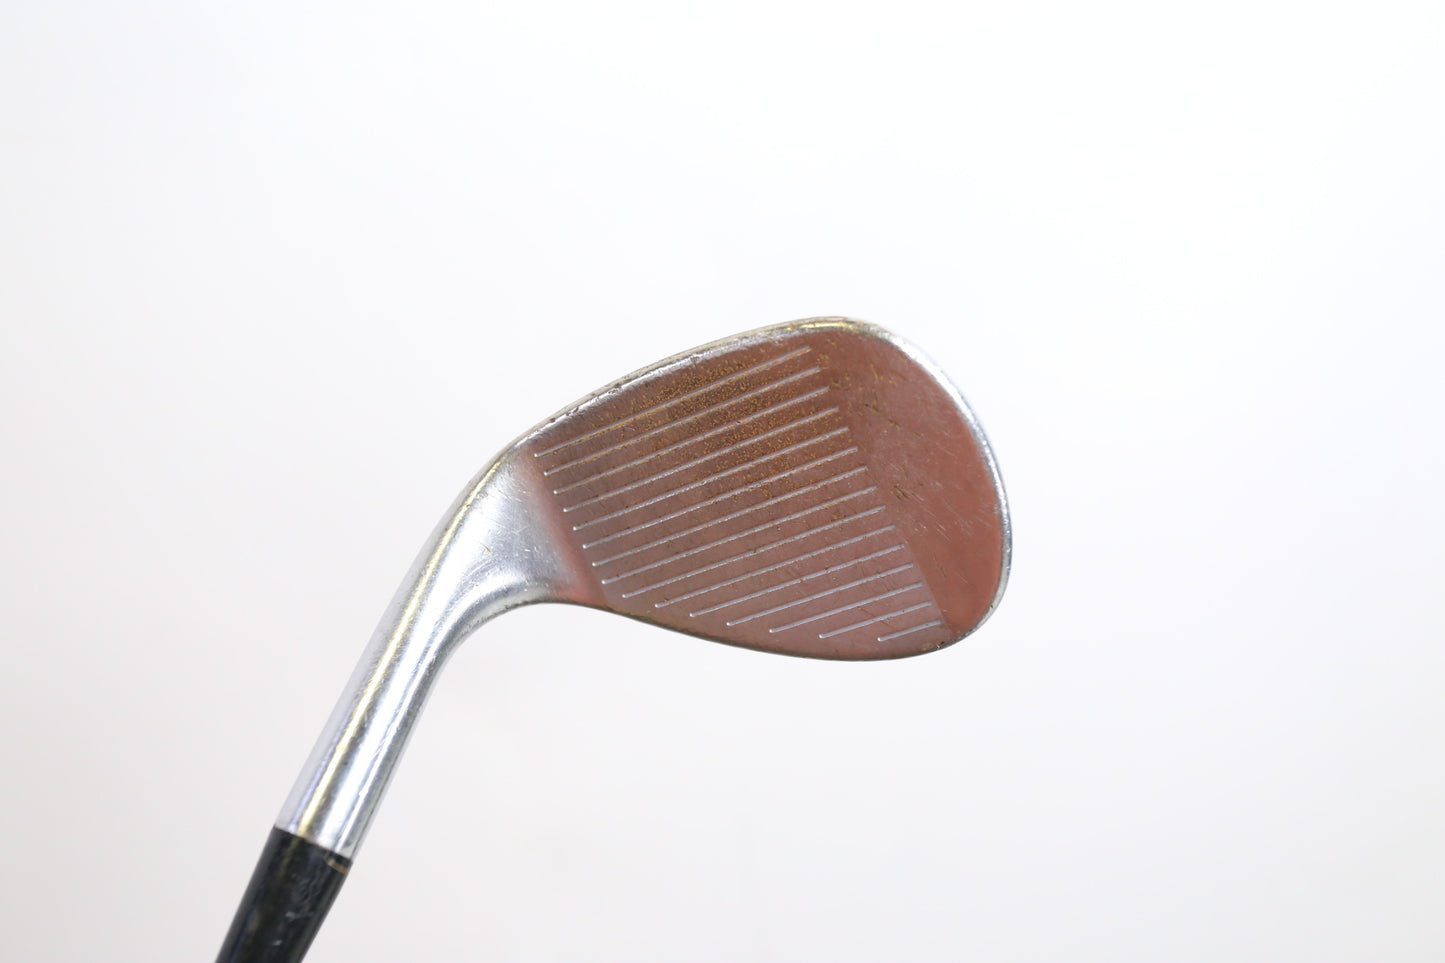 Used Cleveland CG10 Sand Wedge - Right-Handed - 56 Degrees - Stiff Flex